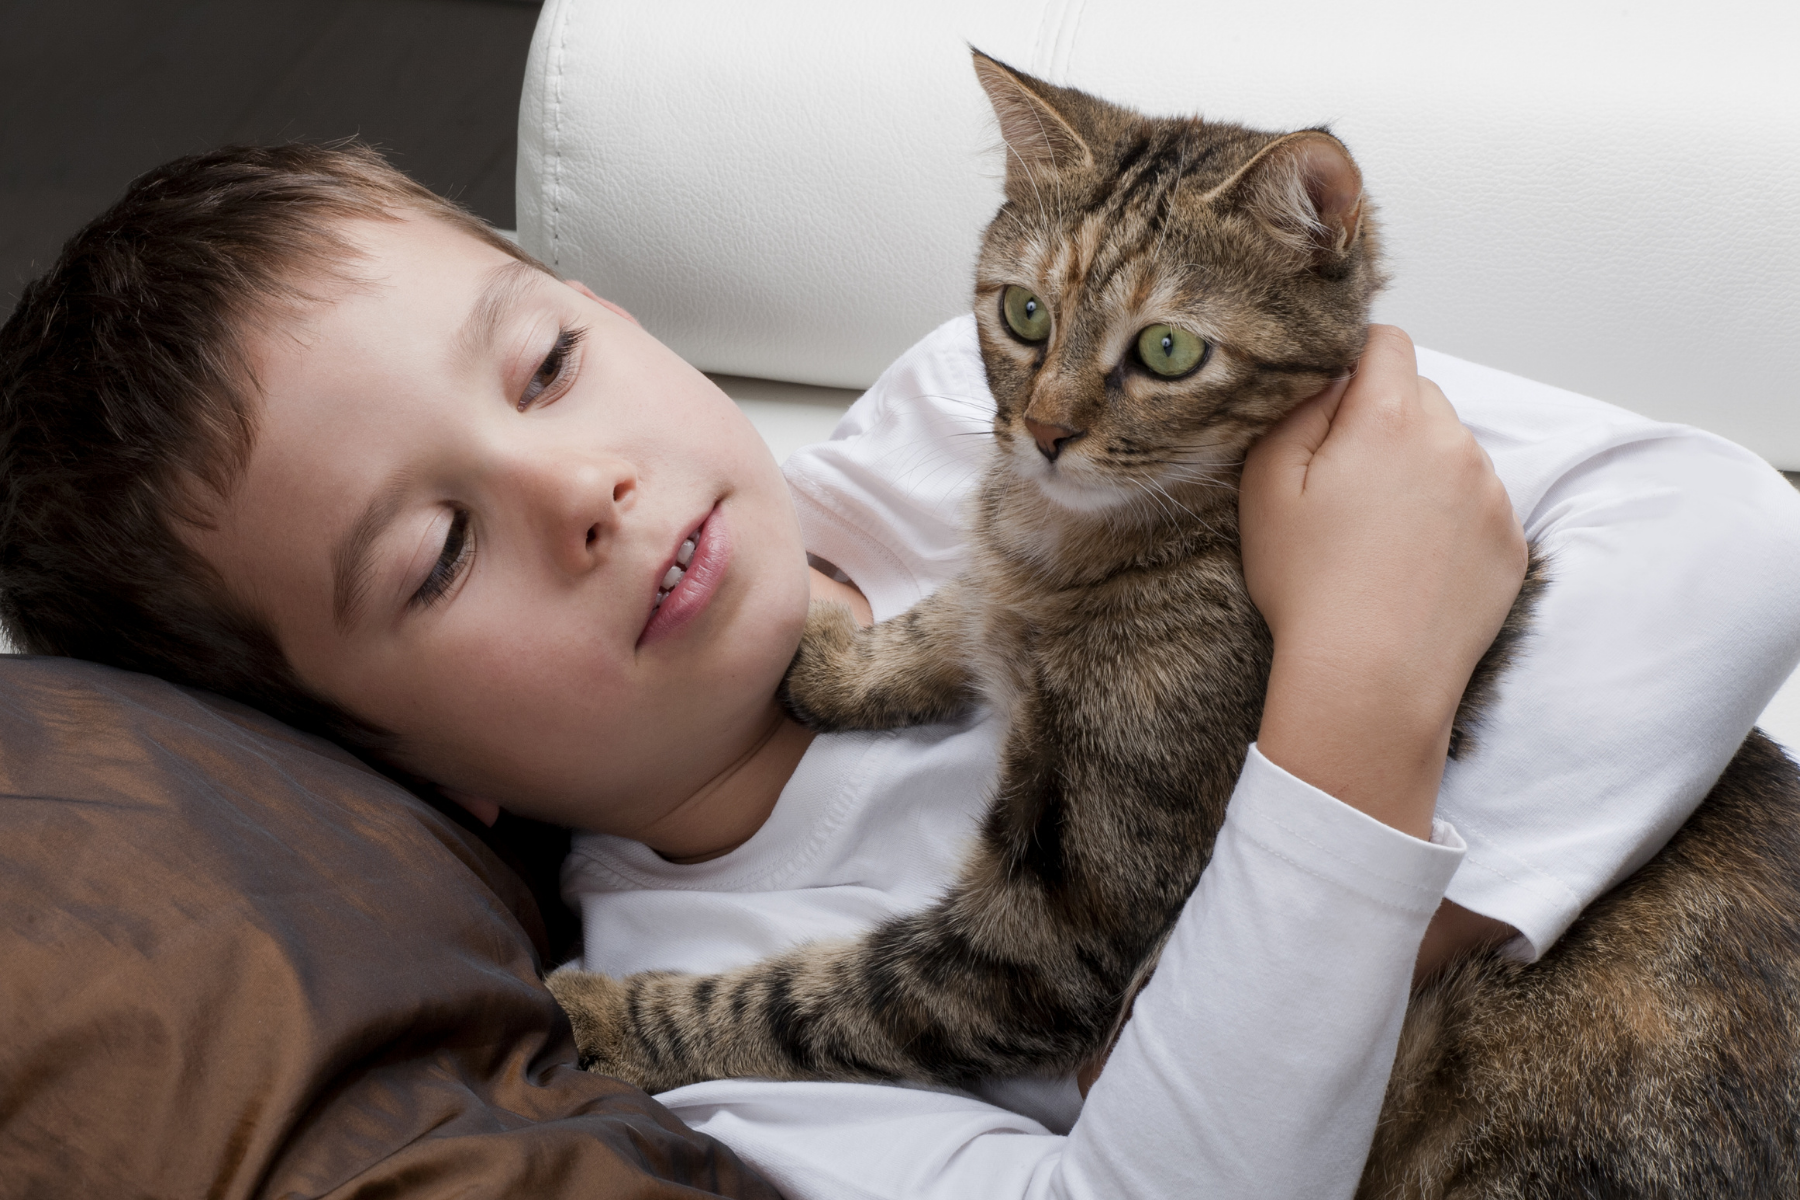 boy in white shirt laying on couch holding a gray tabby cat